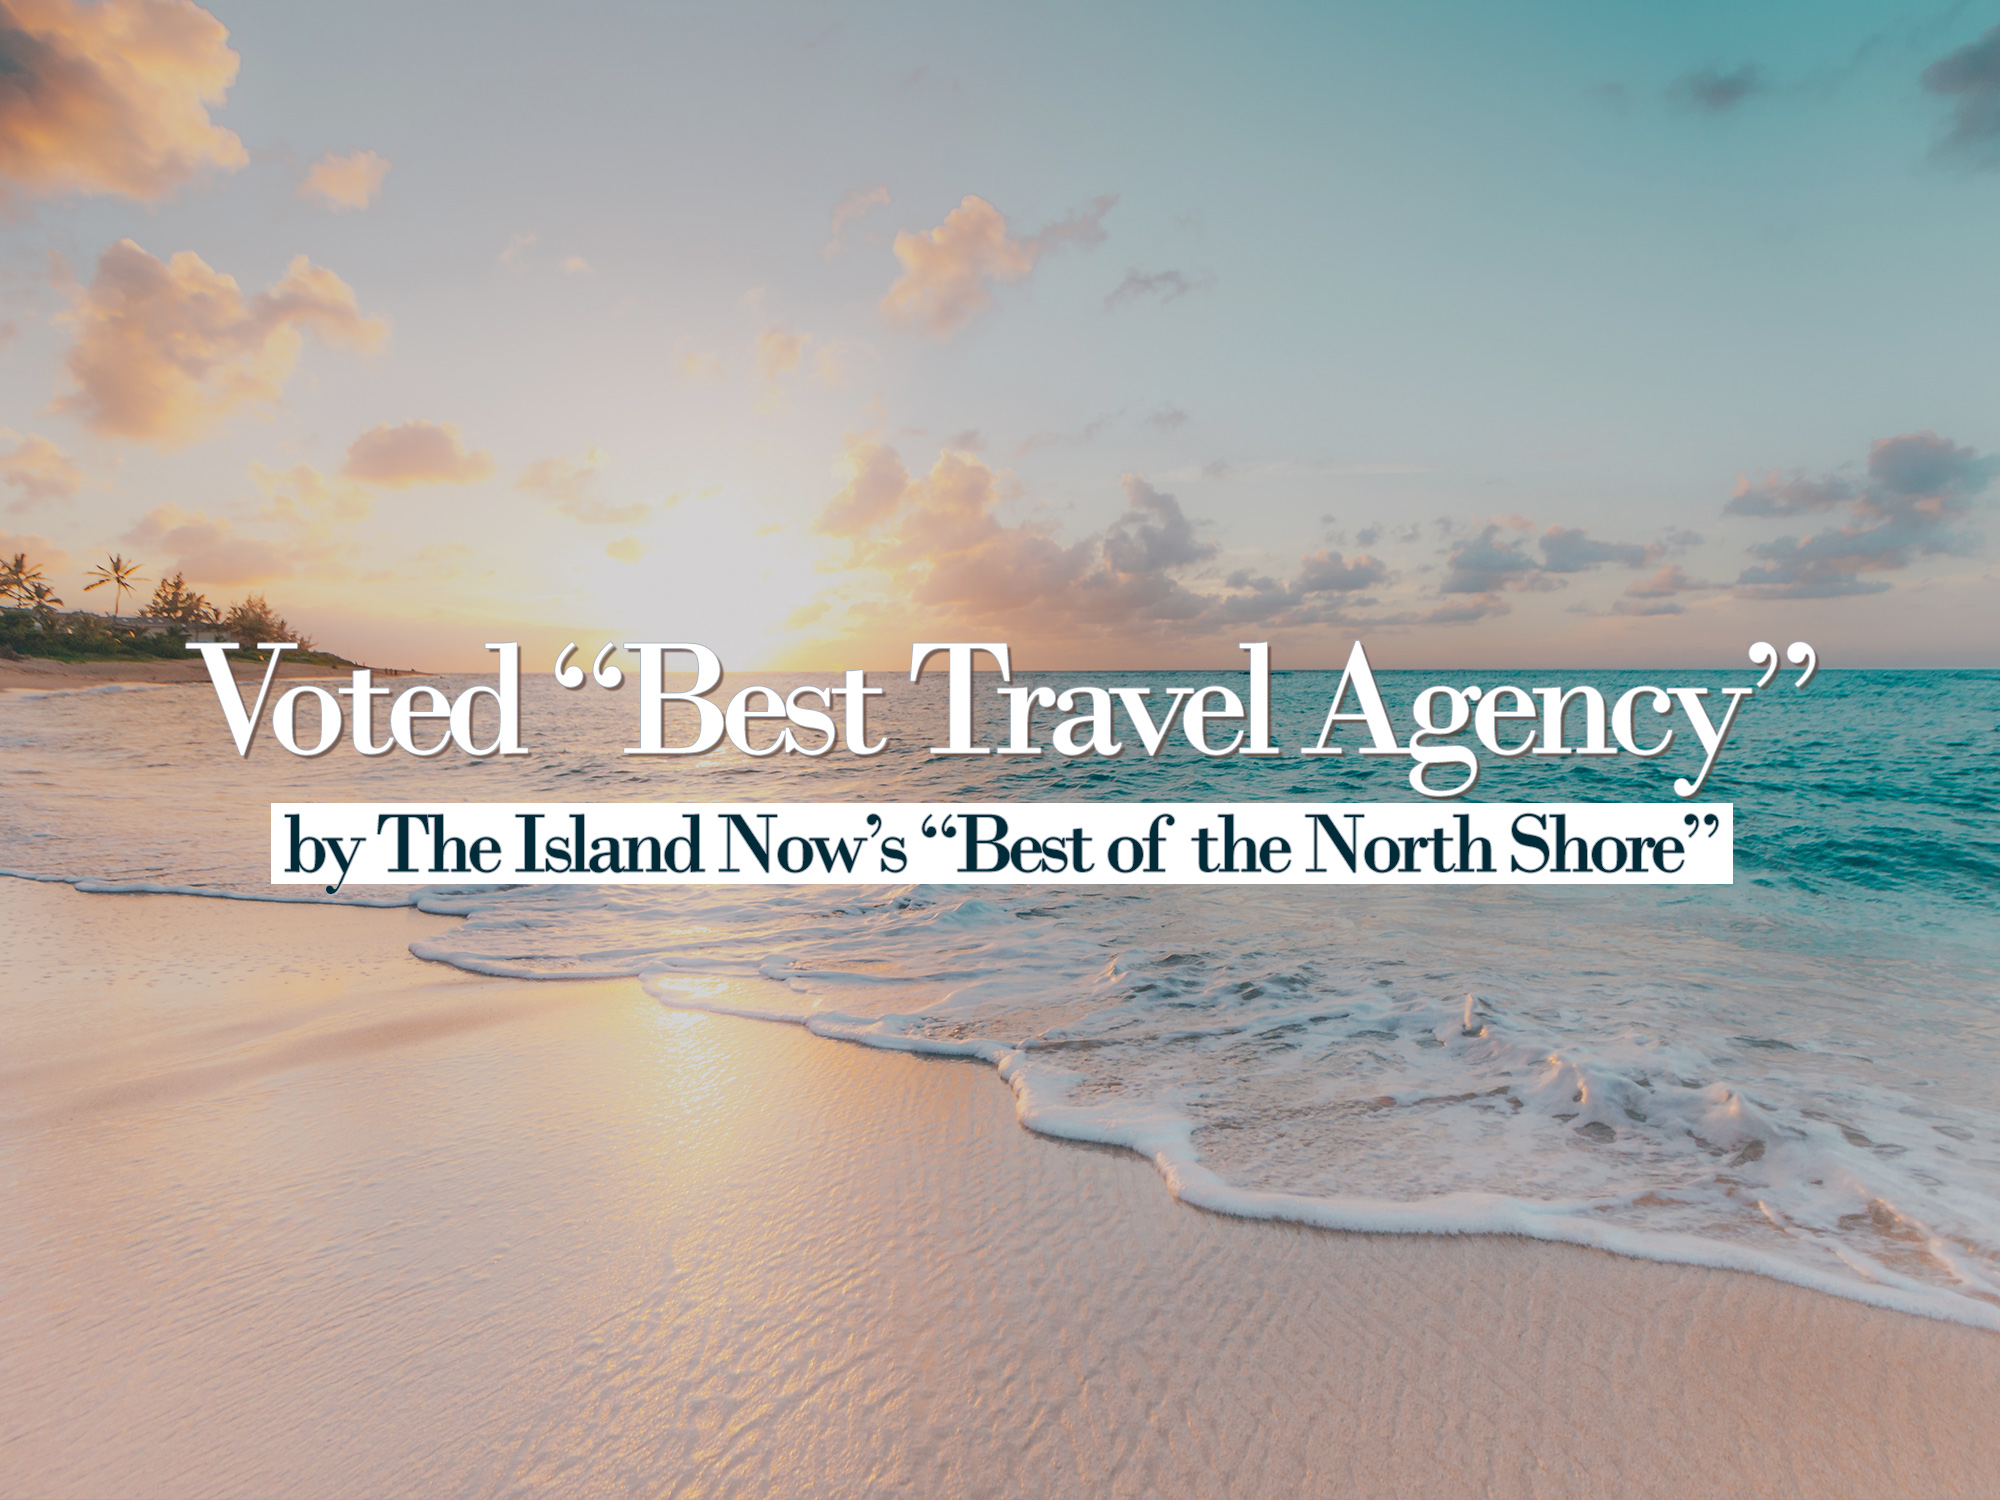 Voted "Best Travel Agency"